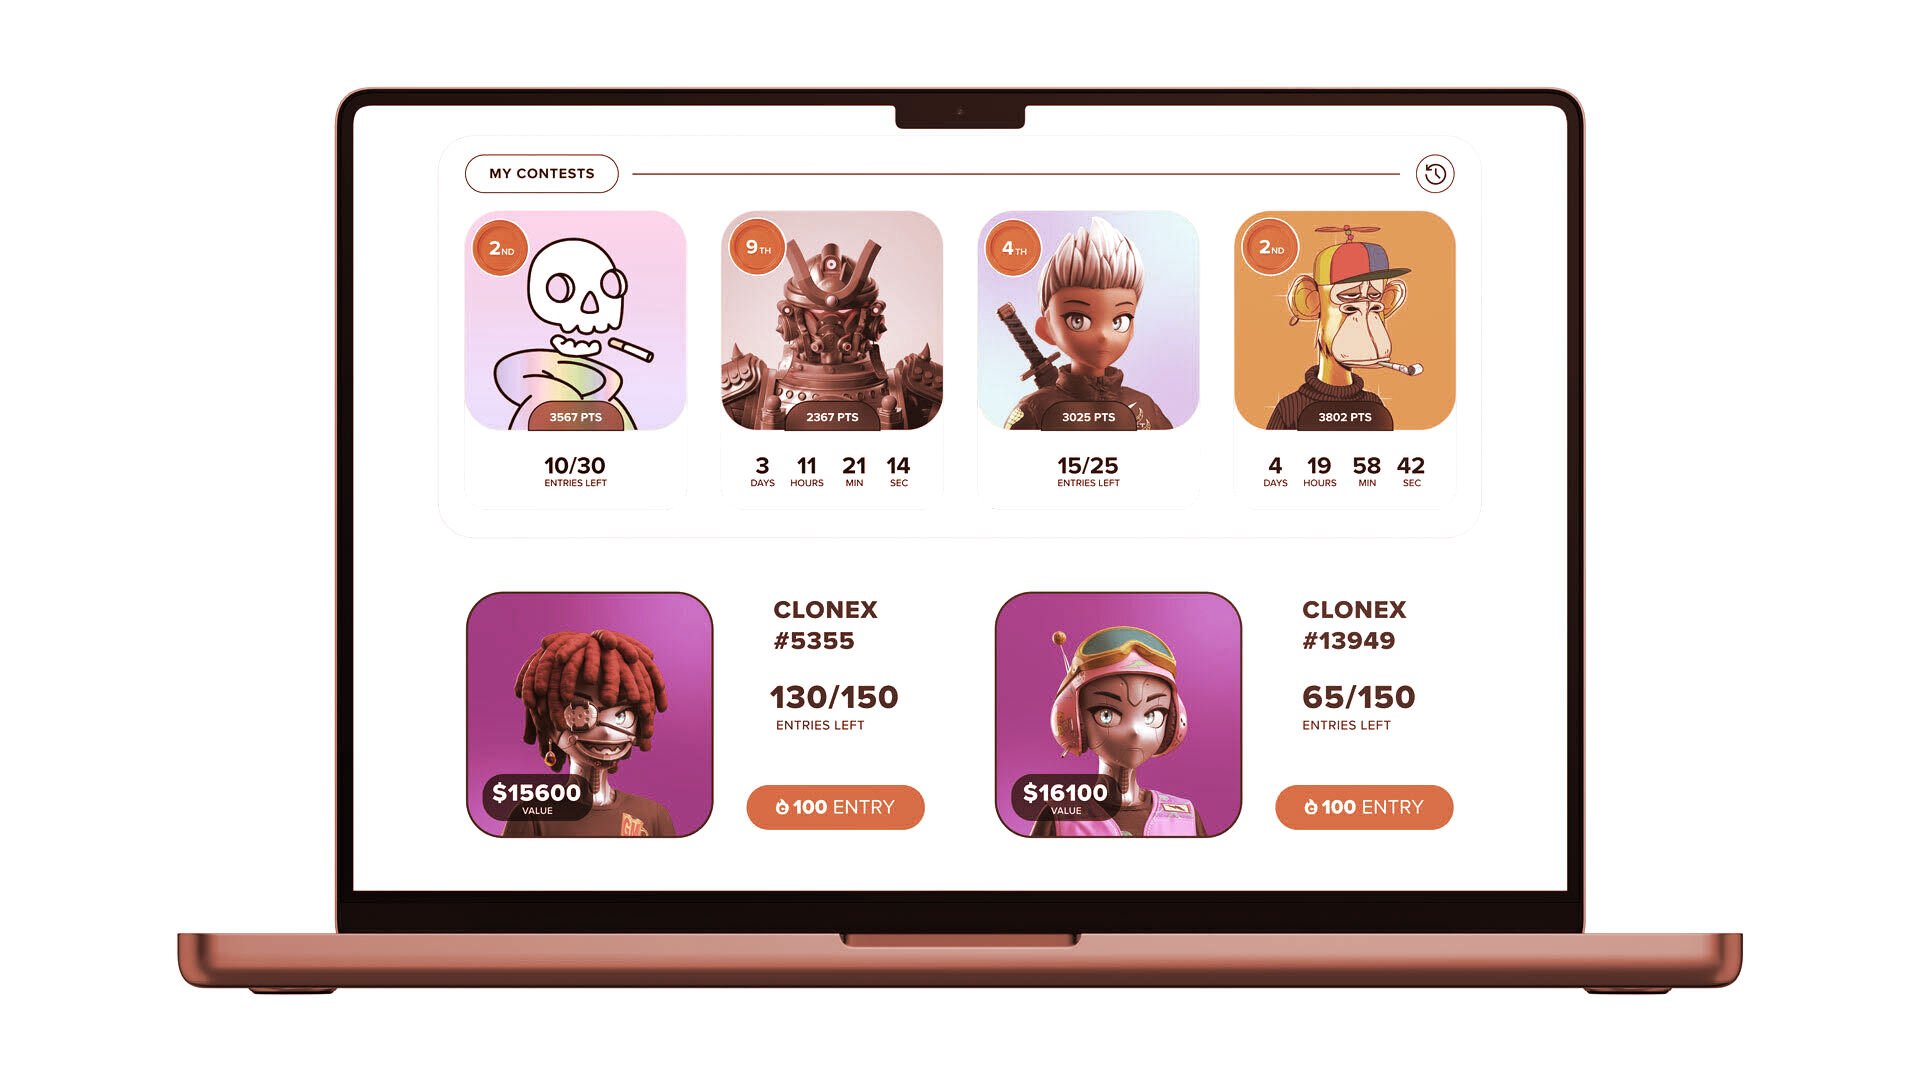 Play Casual Games, Win NFTs: Burn Ghost Raises $3.1M for Gaming Platform